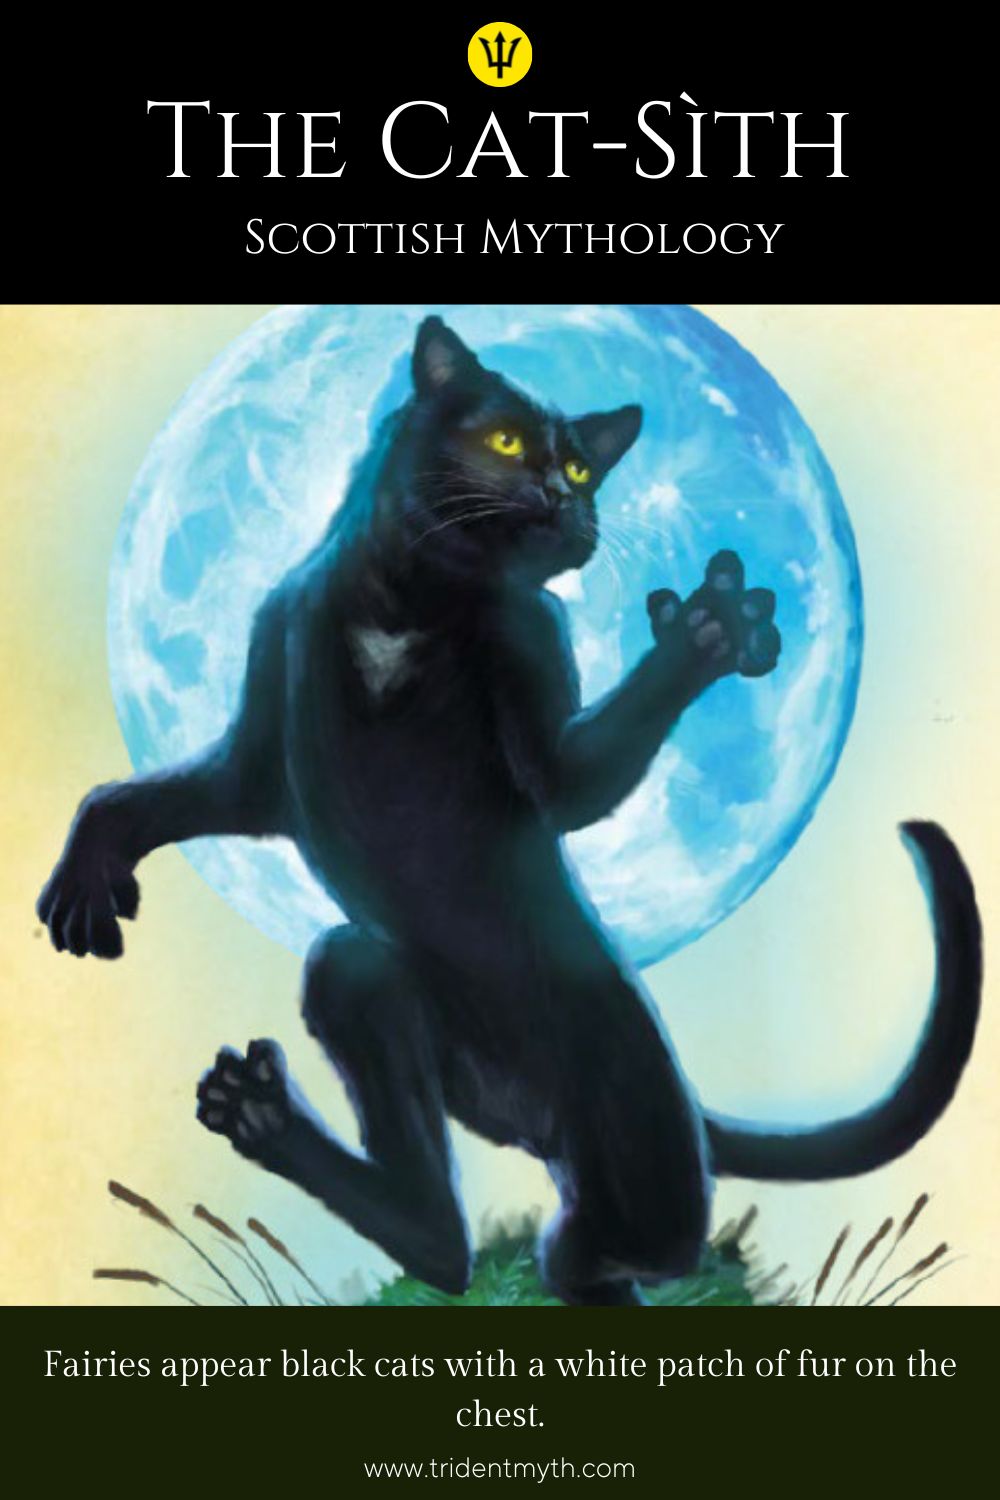 The Cat-Sìth: Scottish Fairies appear black cats with a white patch on the chest.